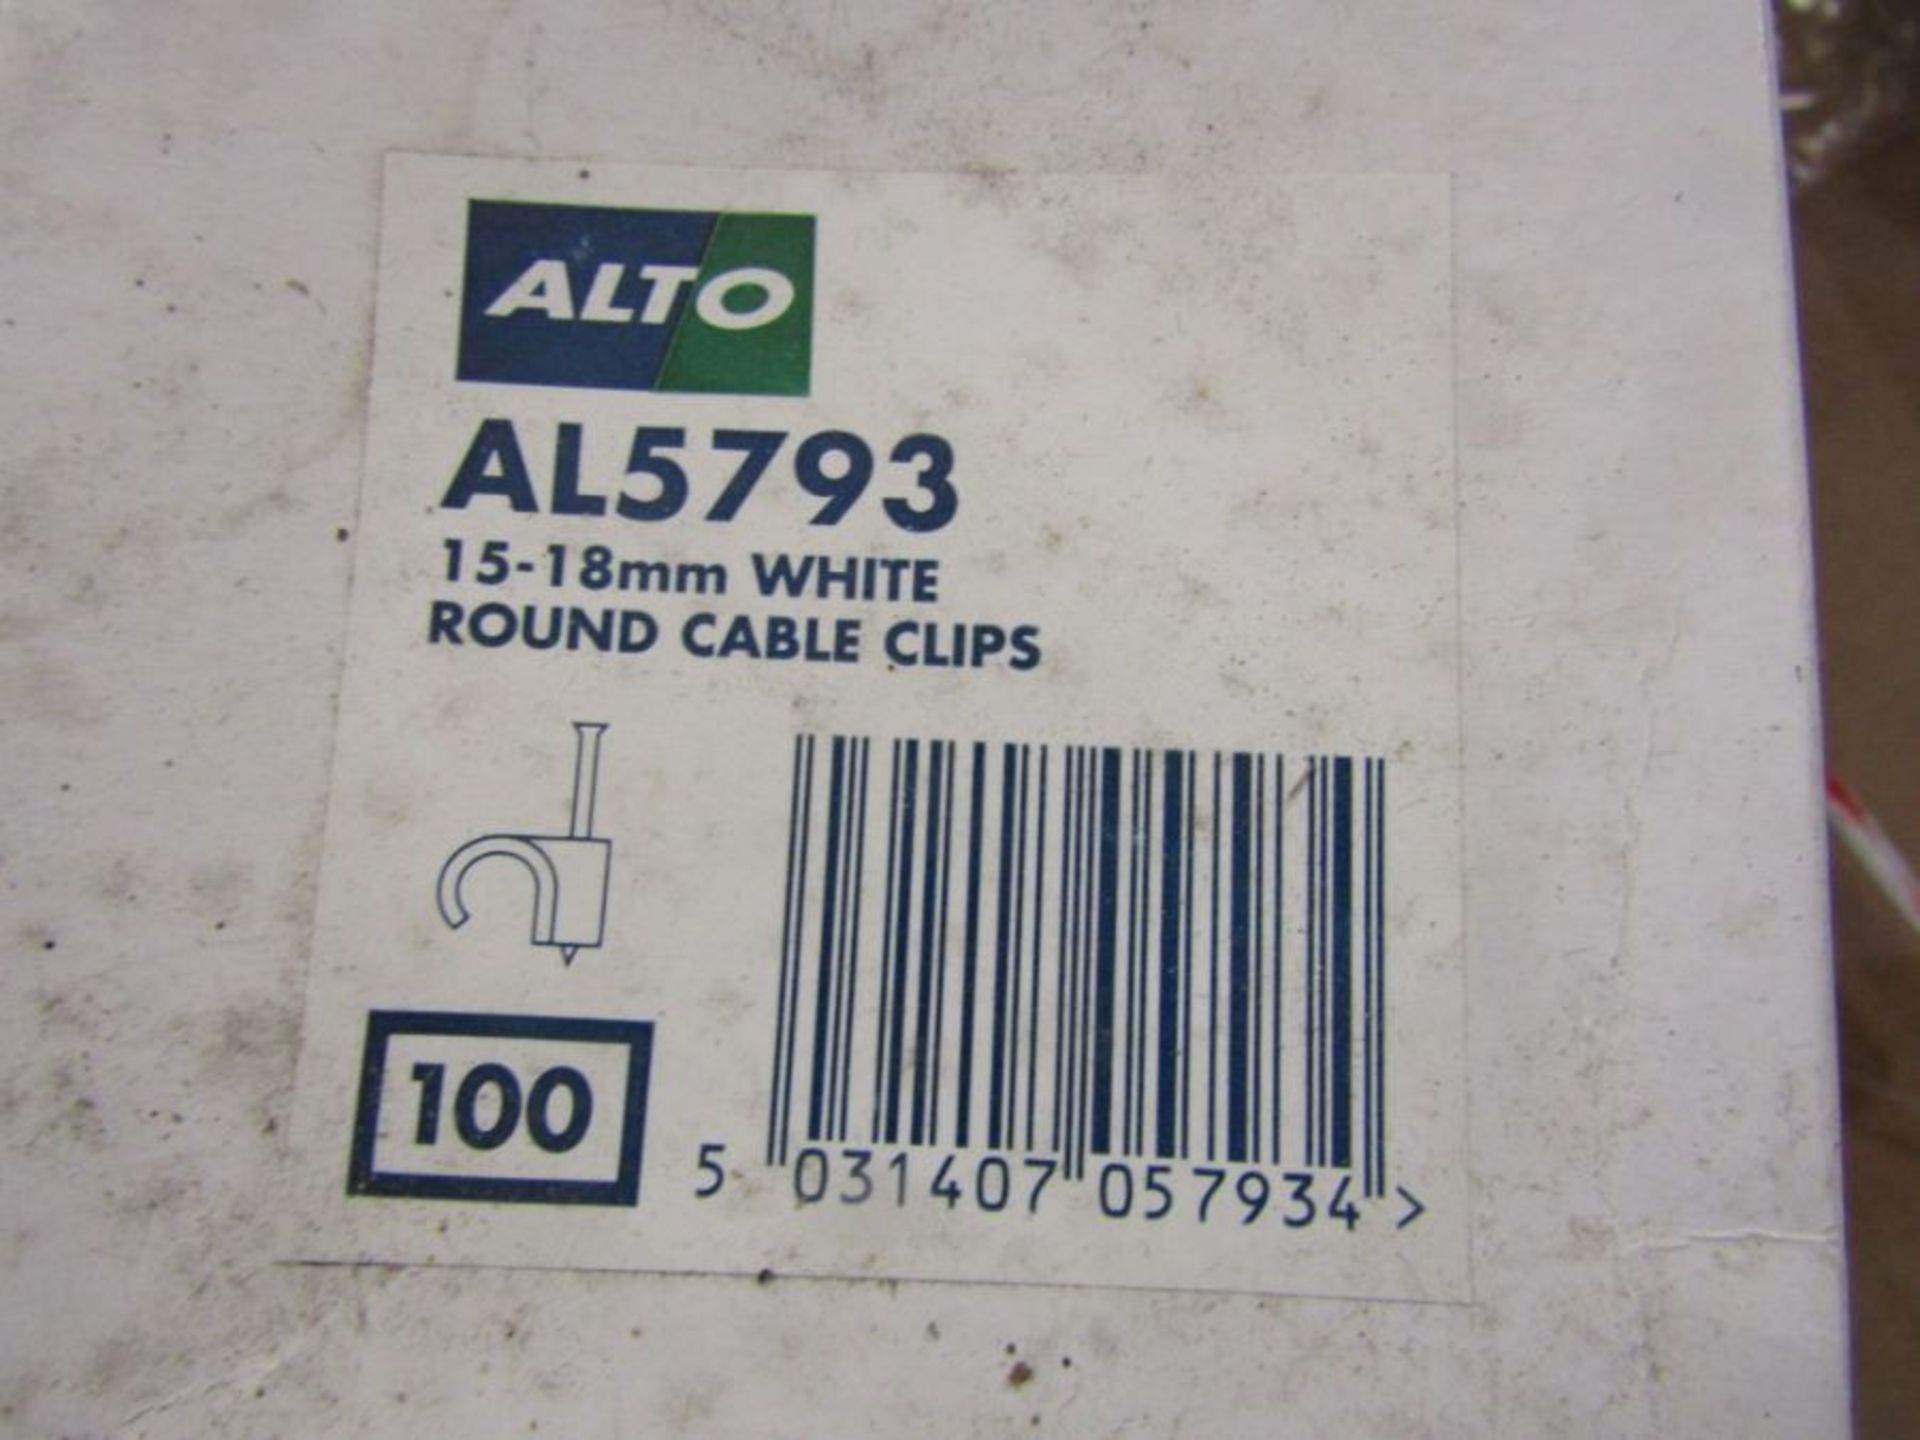 25 x Pack of 100 ALTO 15-18mm Round White Cable Clips - AL5793 - Image 4 of 4